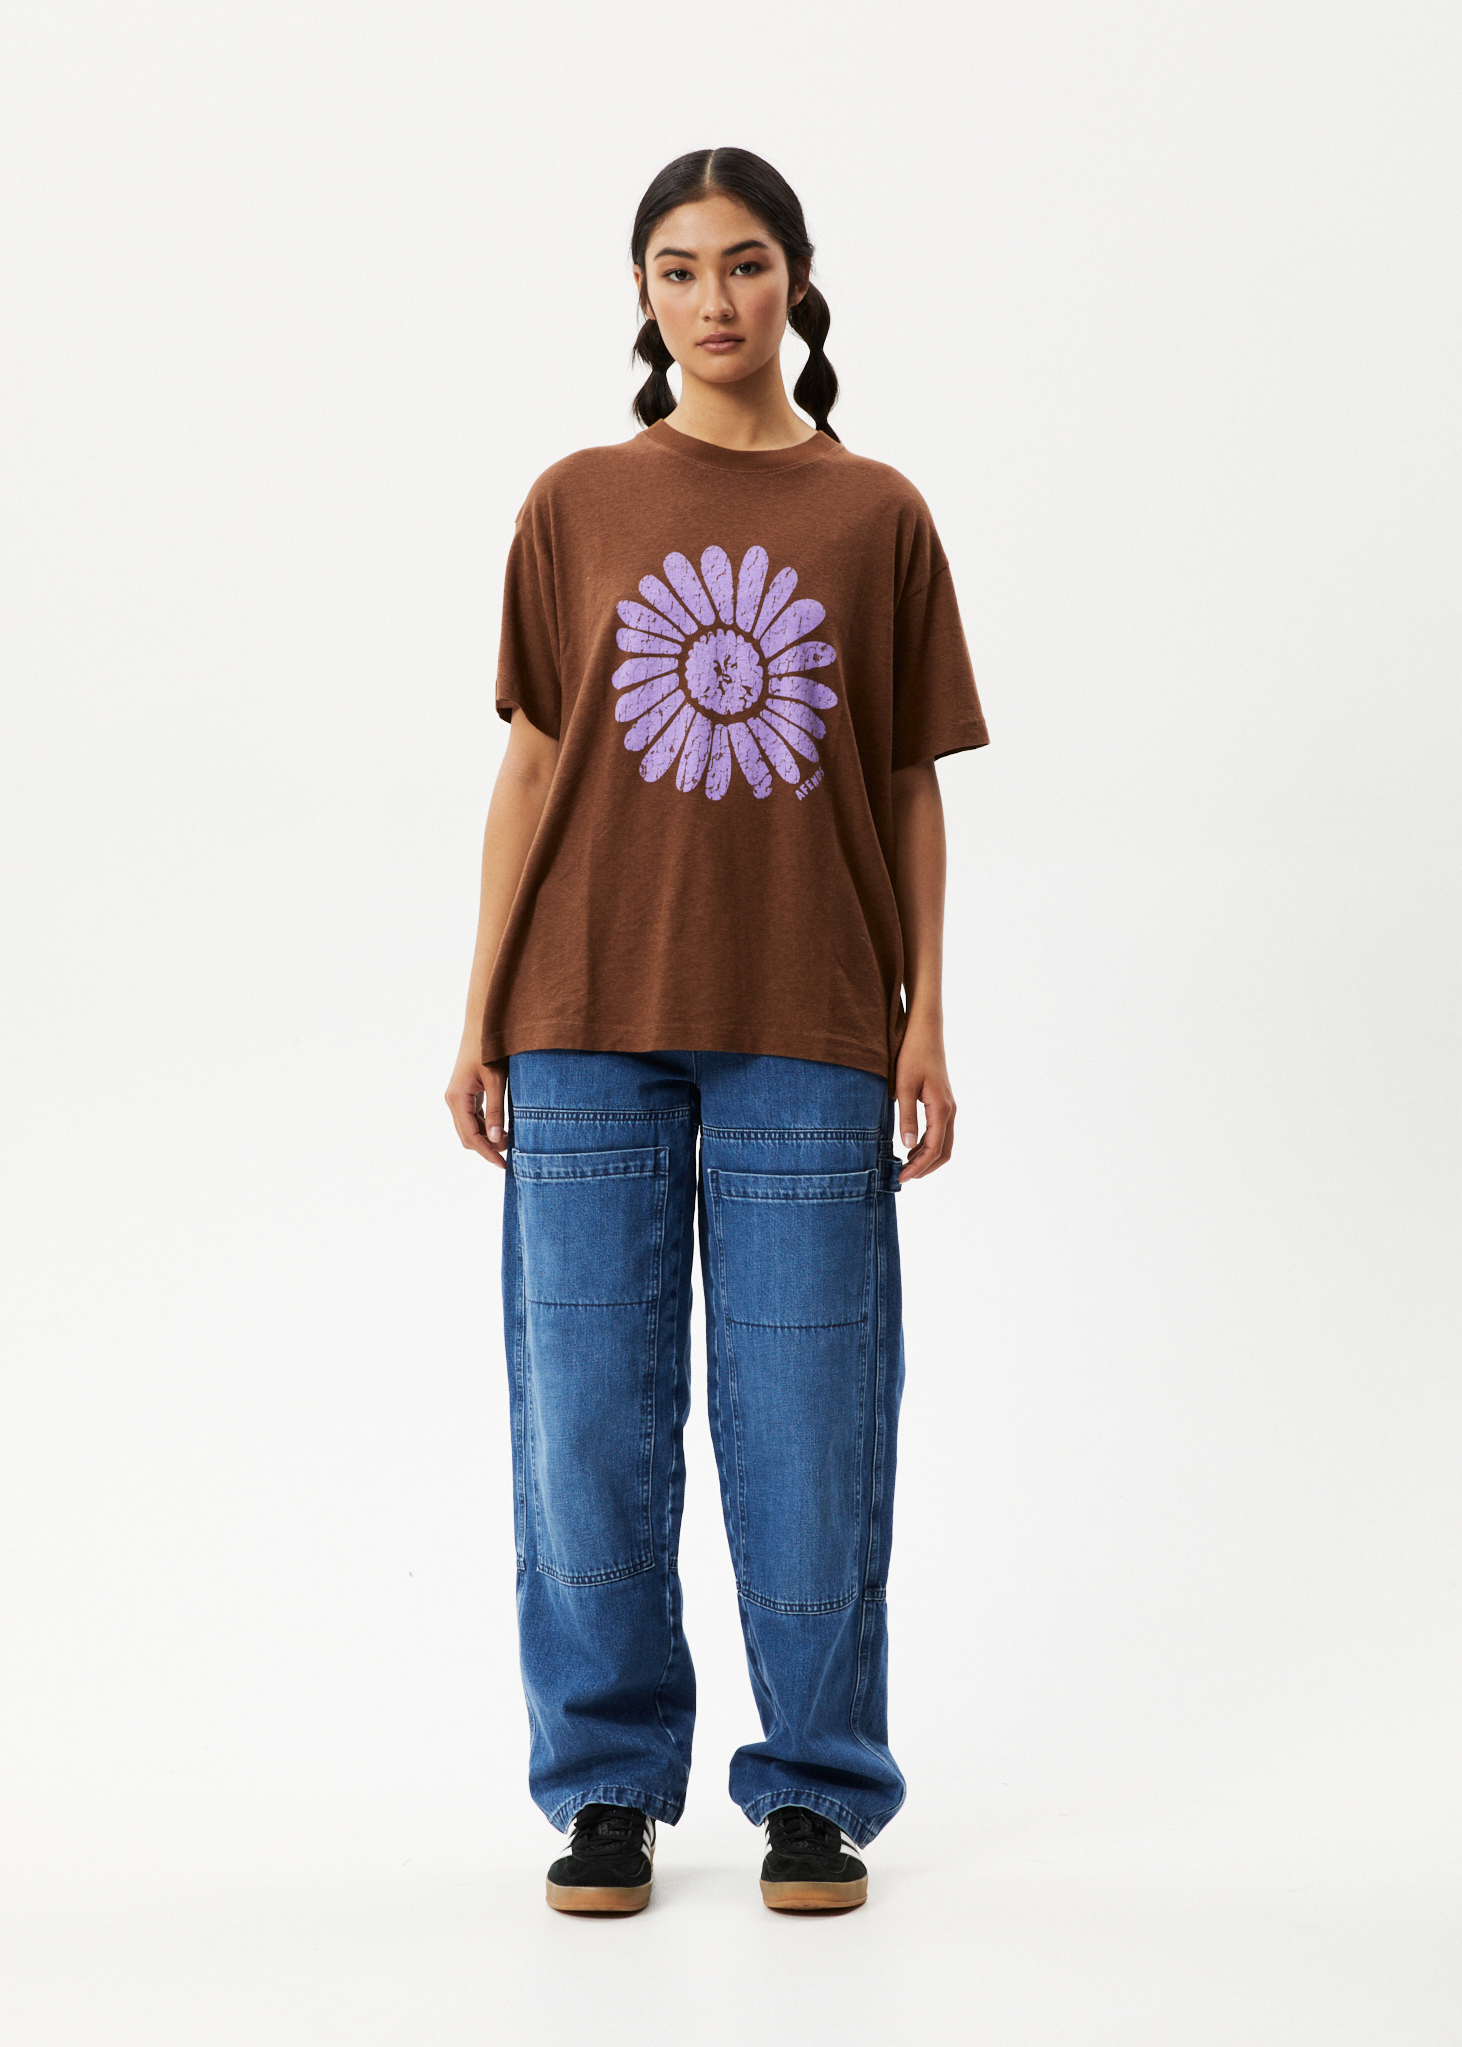 Afends Womens Daisy Slay - Oversized Graphic T-Shirt - Toffee 